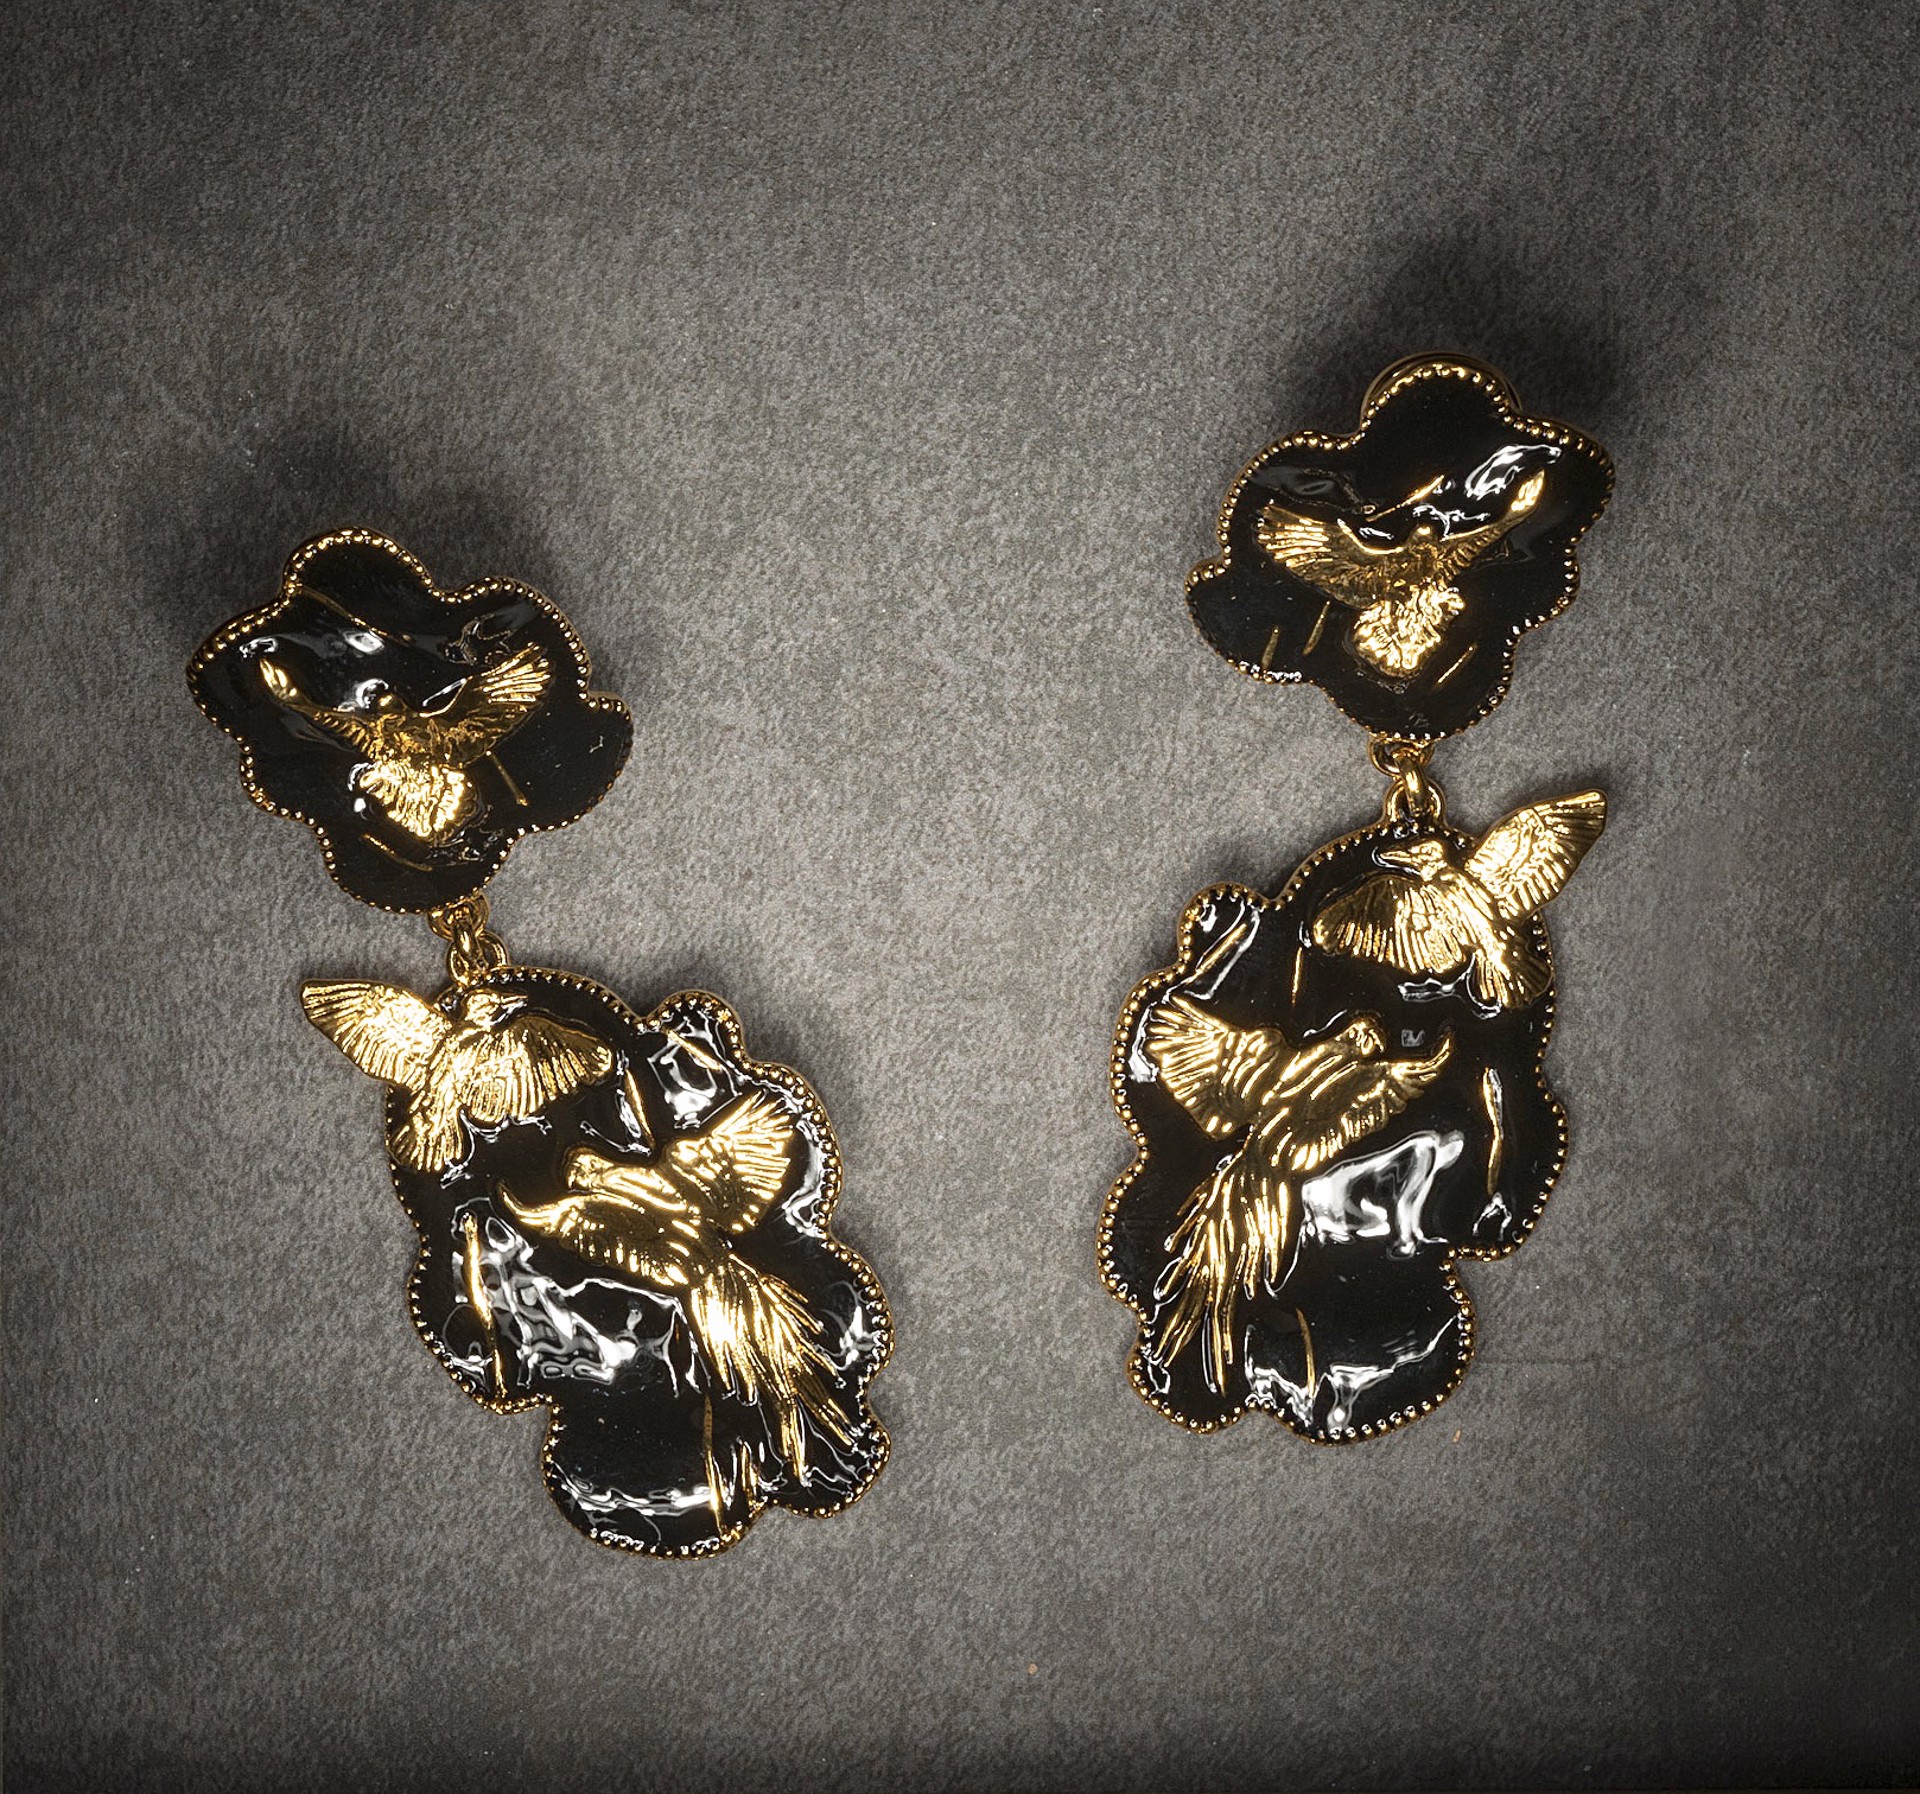 Arise Earrings - Gold and Black by Angela Mia